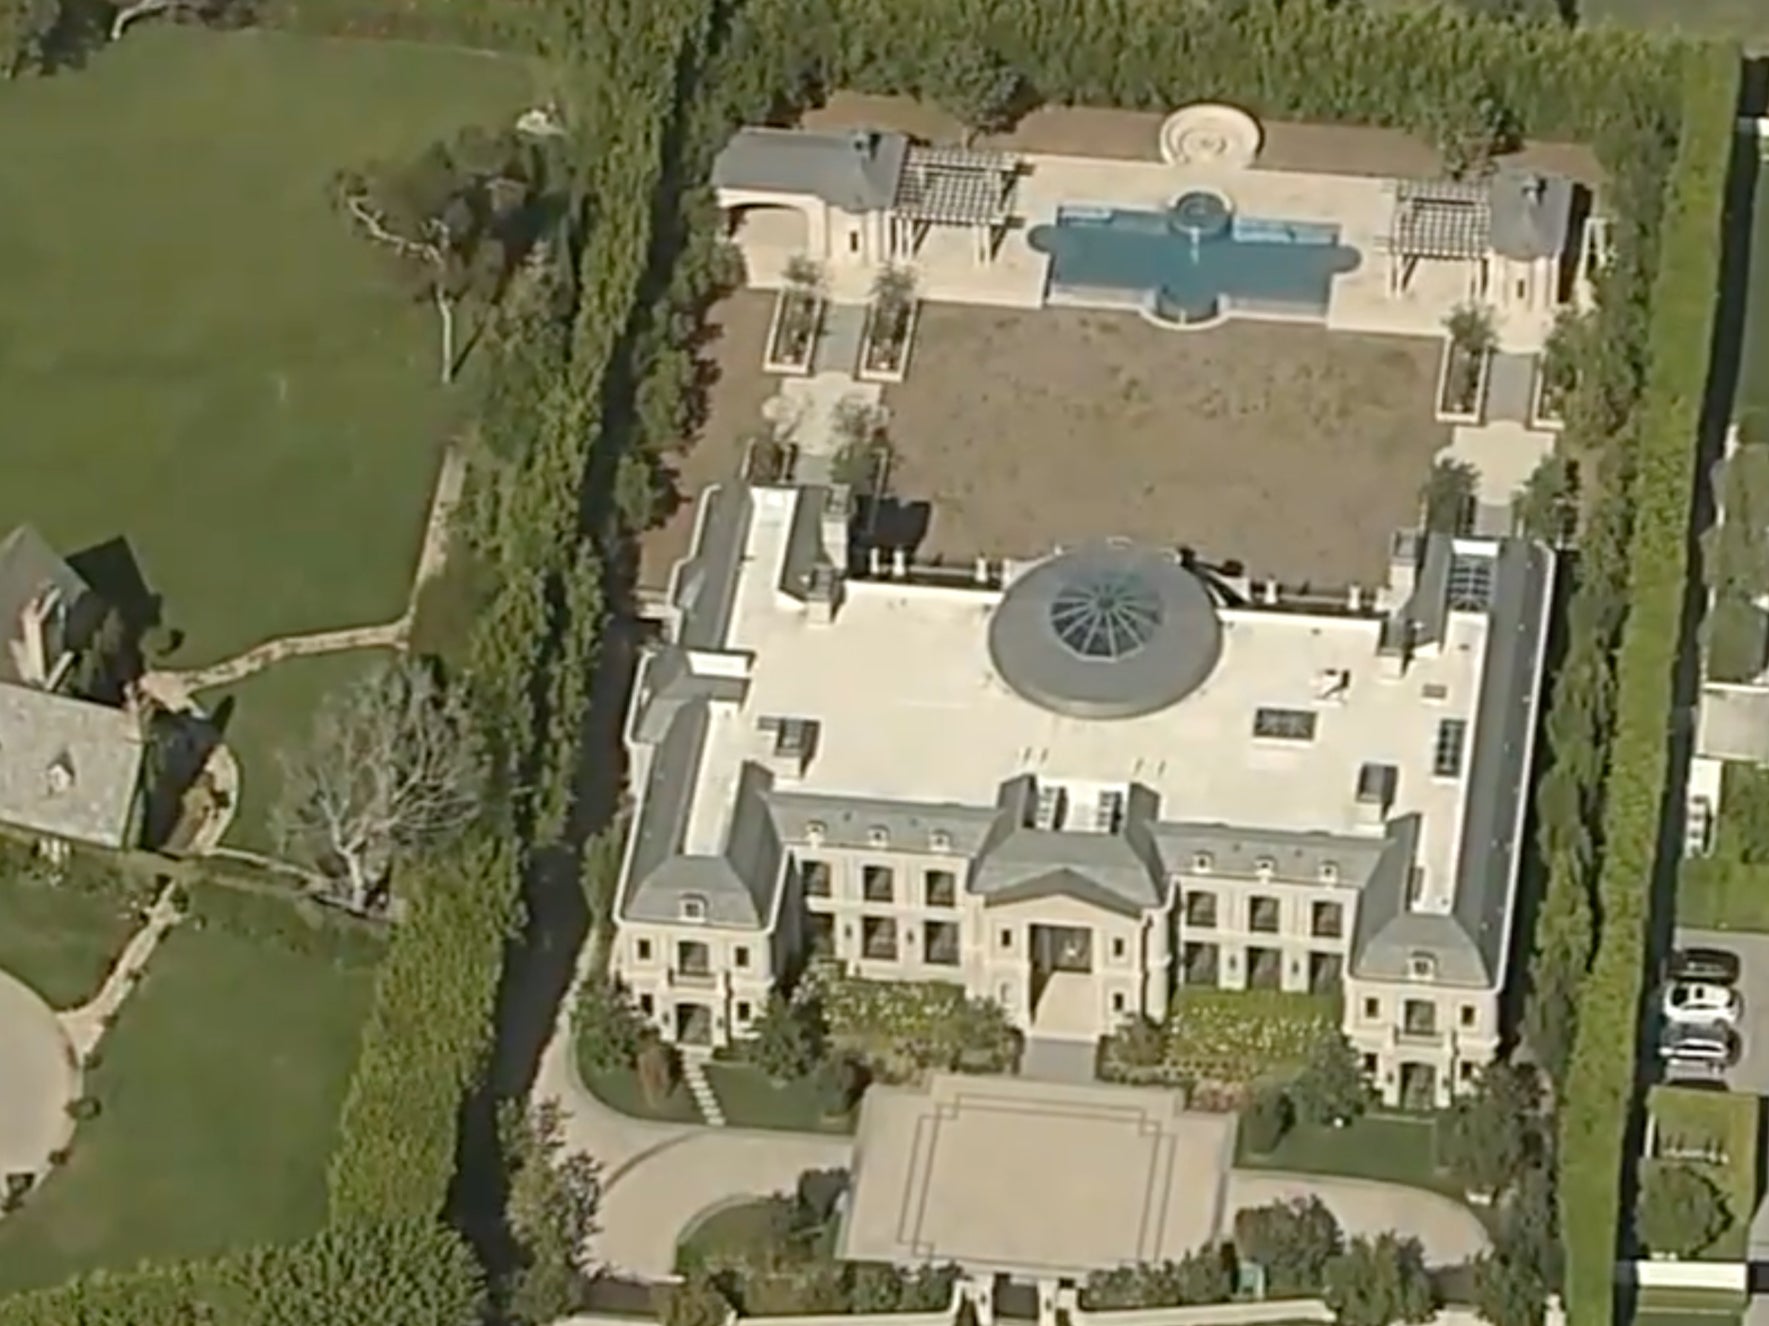 The mansion is located in the Holmby Hills area of Los Angeles